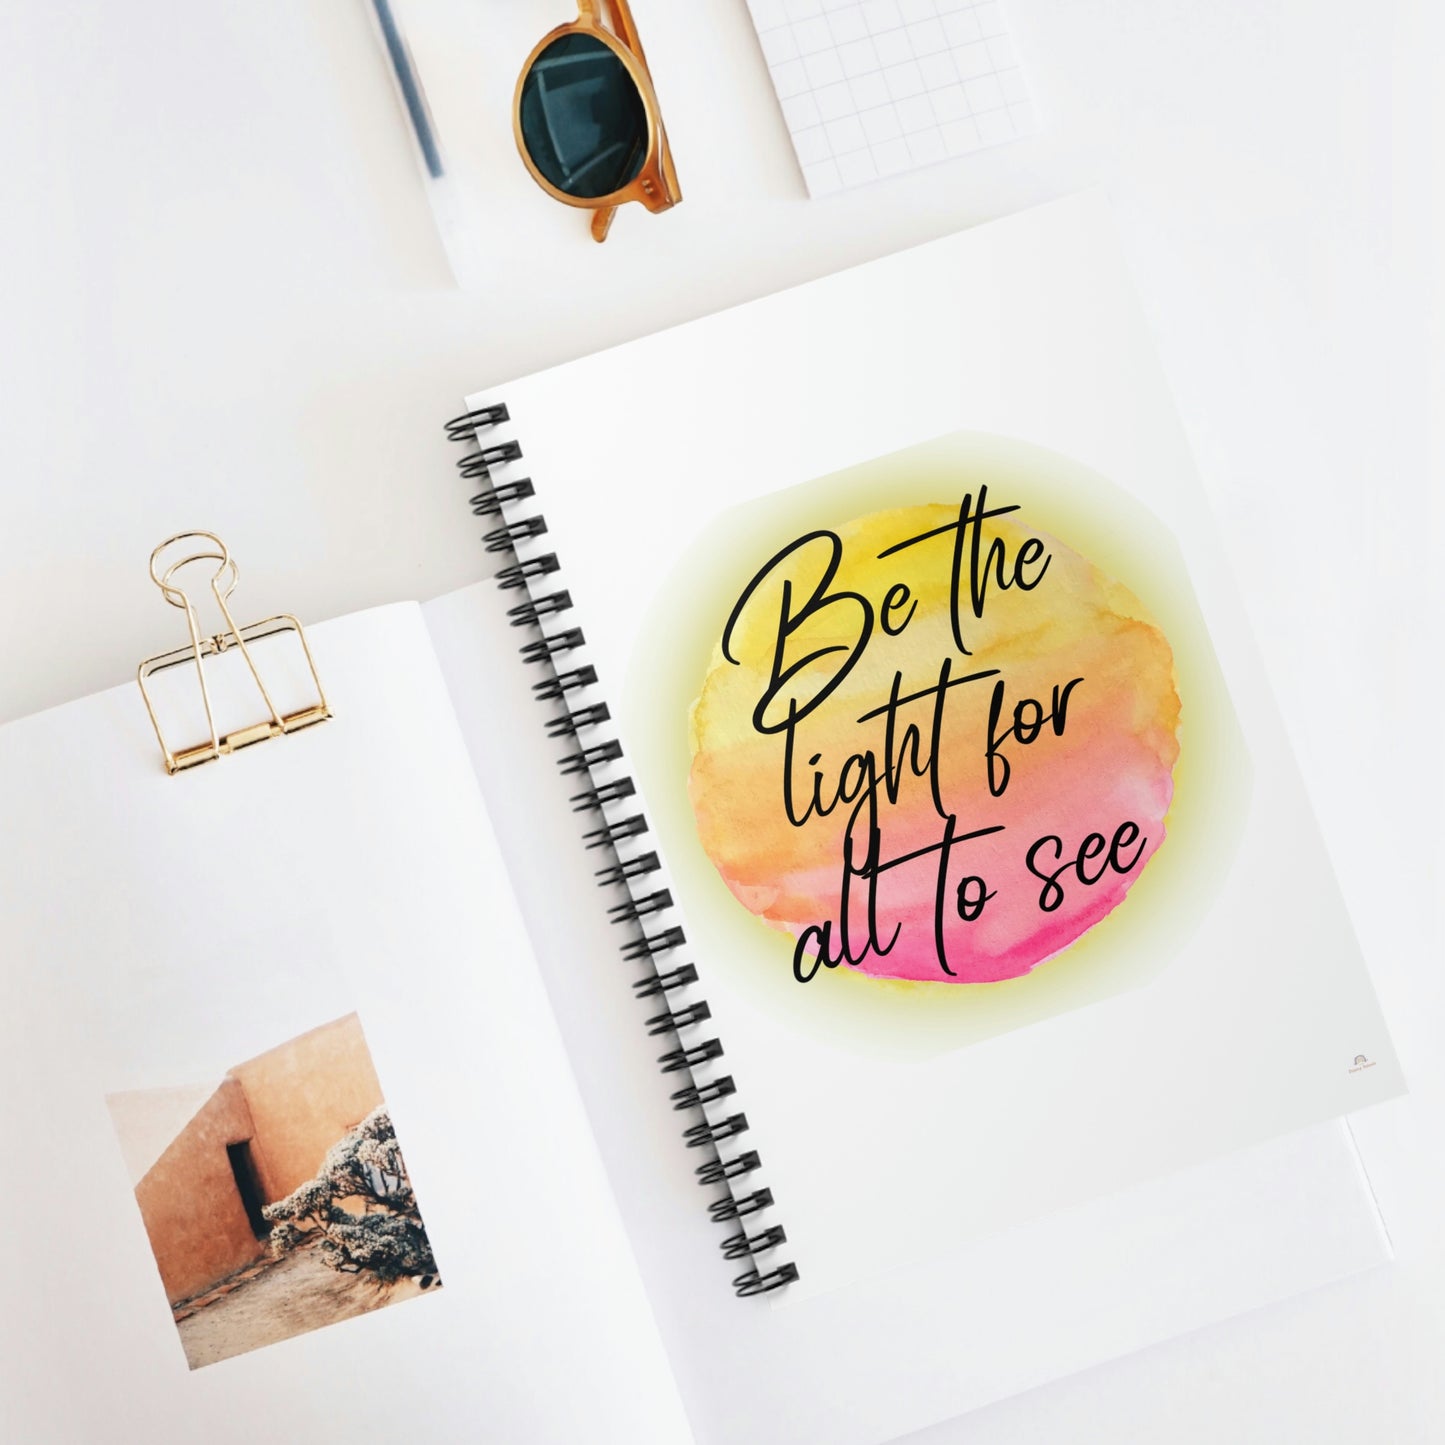 Be the light for all to see -Spiral Notebook - Ruled Line